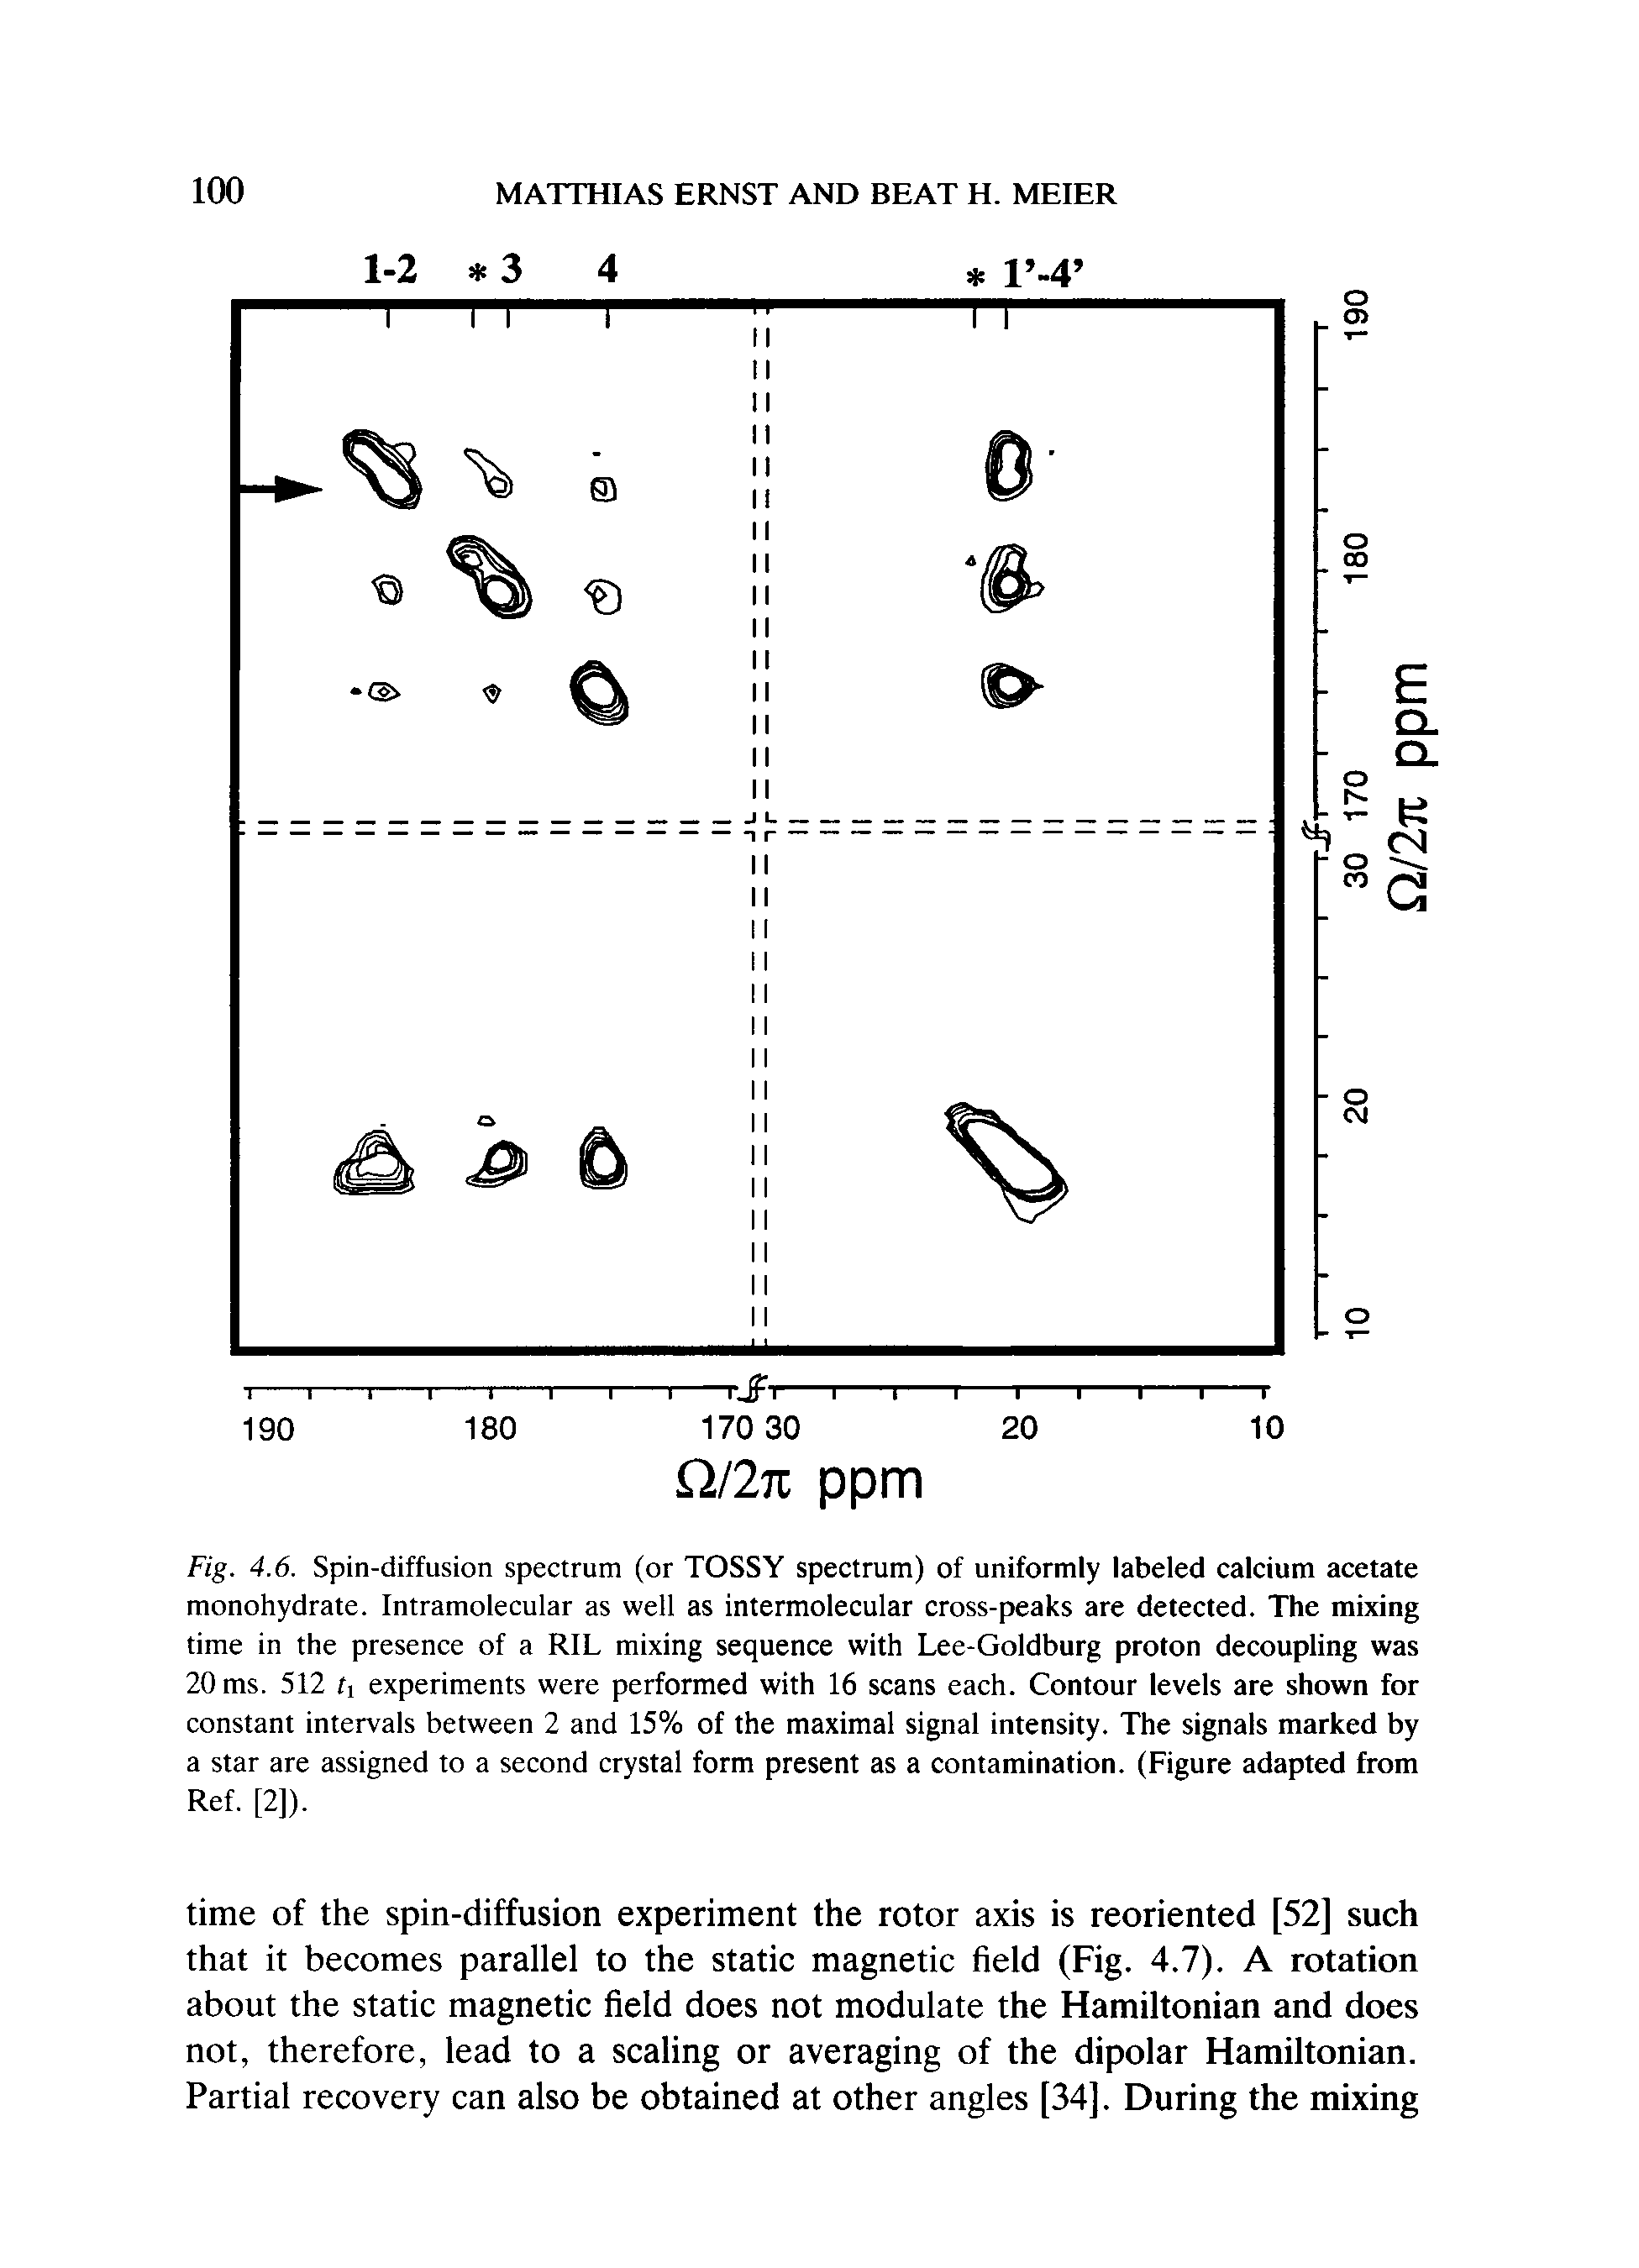 Fig. 4.6. Spin-diffusion spectrum (or TOSSY spectrum) of uniformly labeled calcium acetate monohydrate. Intramolecular as well as intermolecular cross-peaks are detected. The mixing time in the presence of a RIL mixing sequence with Lee-Goldburg proton decoupling was 20 ms. 512 ti experiments were performed with 16 scans each. Contour levels are shown for constant intervals between 2 and 15% of the maximal signal intensity. The signals marked by a star are assigned to a second crystal form present as a contamination. (Figure adapted from Ref. [2]).